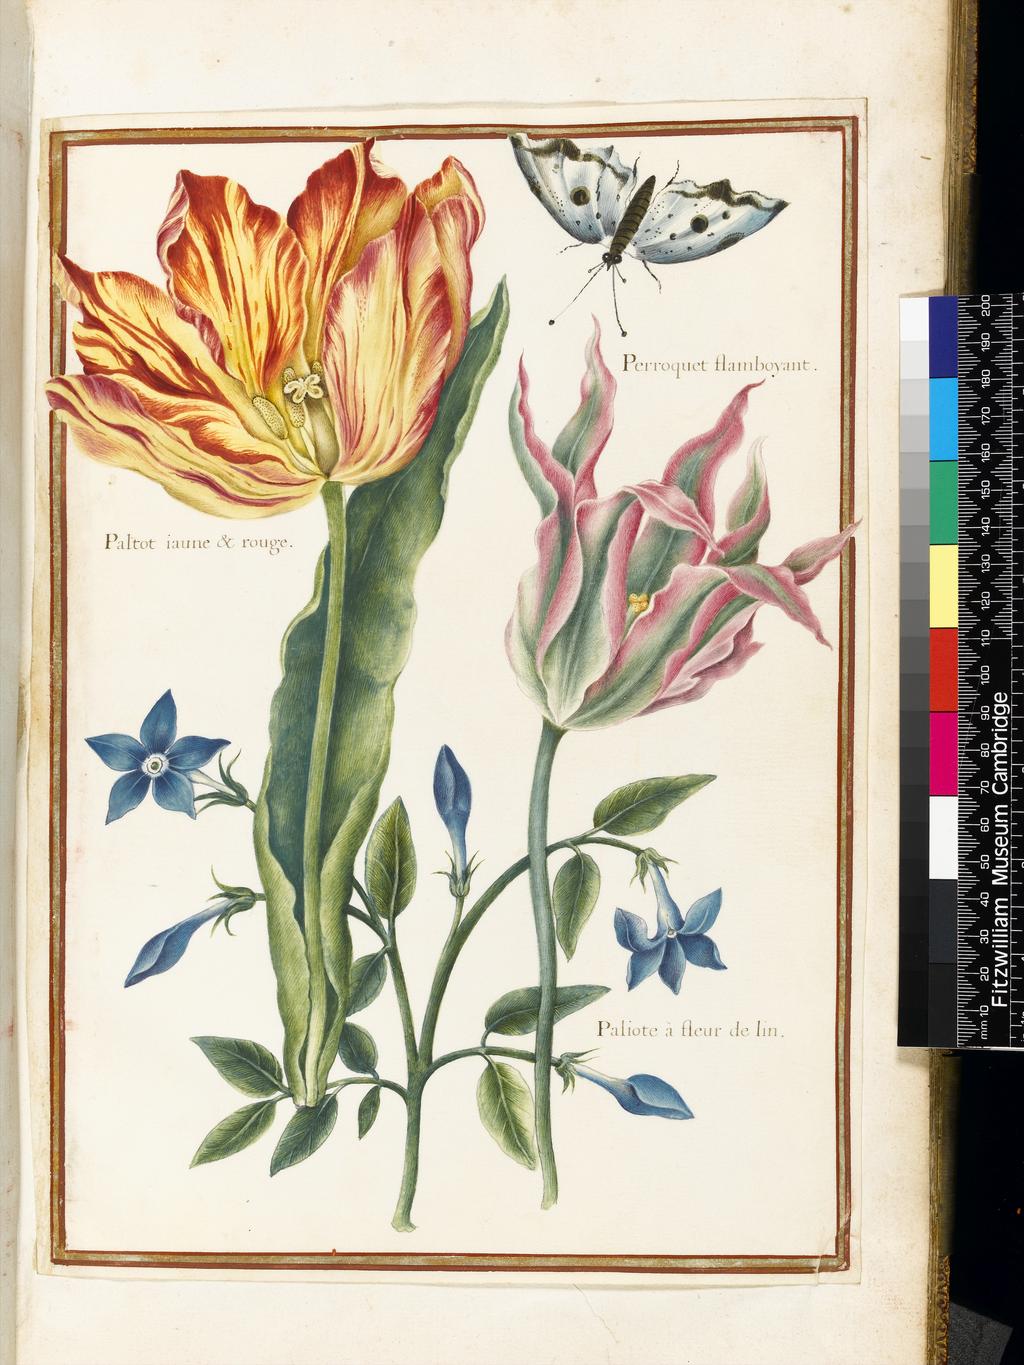 An image of A stylised drawing of two broken tulips and a Periwinkle. Robert, Nicolas attributed to (French, 1614-1685). Graphite, ink, watercolour and bodycolour on vellum, height 322 mm, width 224 mm. Album containing 62 botanical drawings on vellum tipped in on the gilt-edged pages of the album which bear the watermark of an 18th century French paper-maker, Malmenayde of Thiers (active from 1731). Bound in red morocco with clasps, the spine tooled in gilt. The Pages are interleaved with thin protective paper. Ruled lines of red and gold border the drawings on all sides. 17th Century. French.